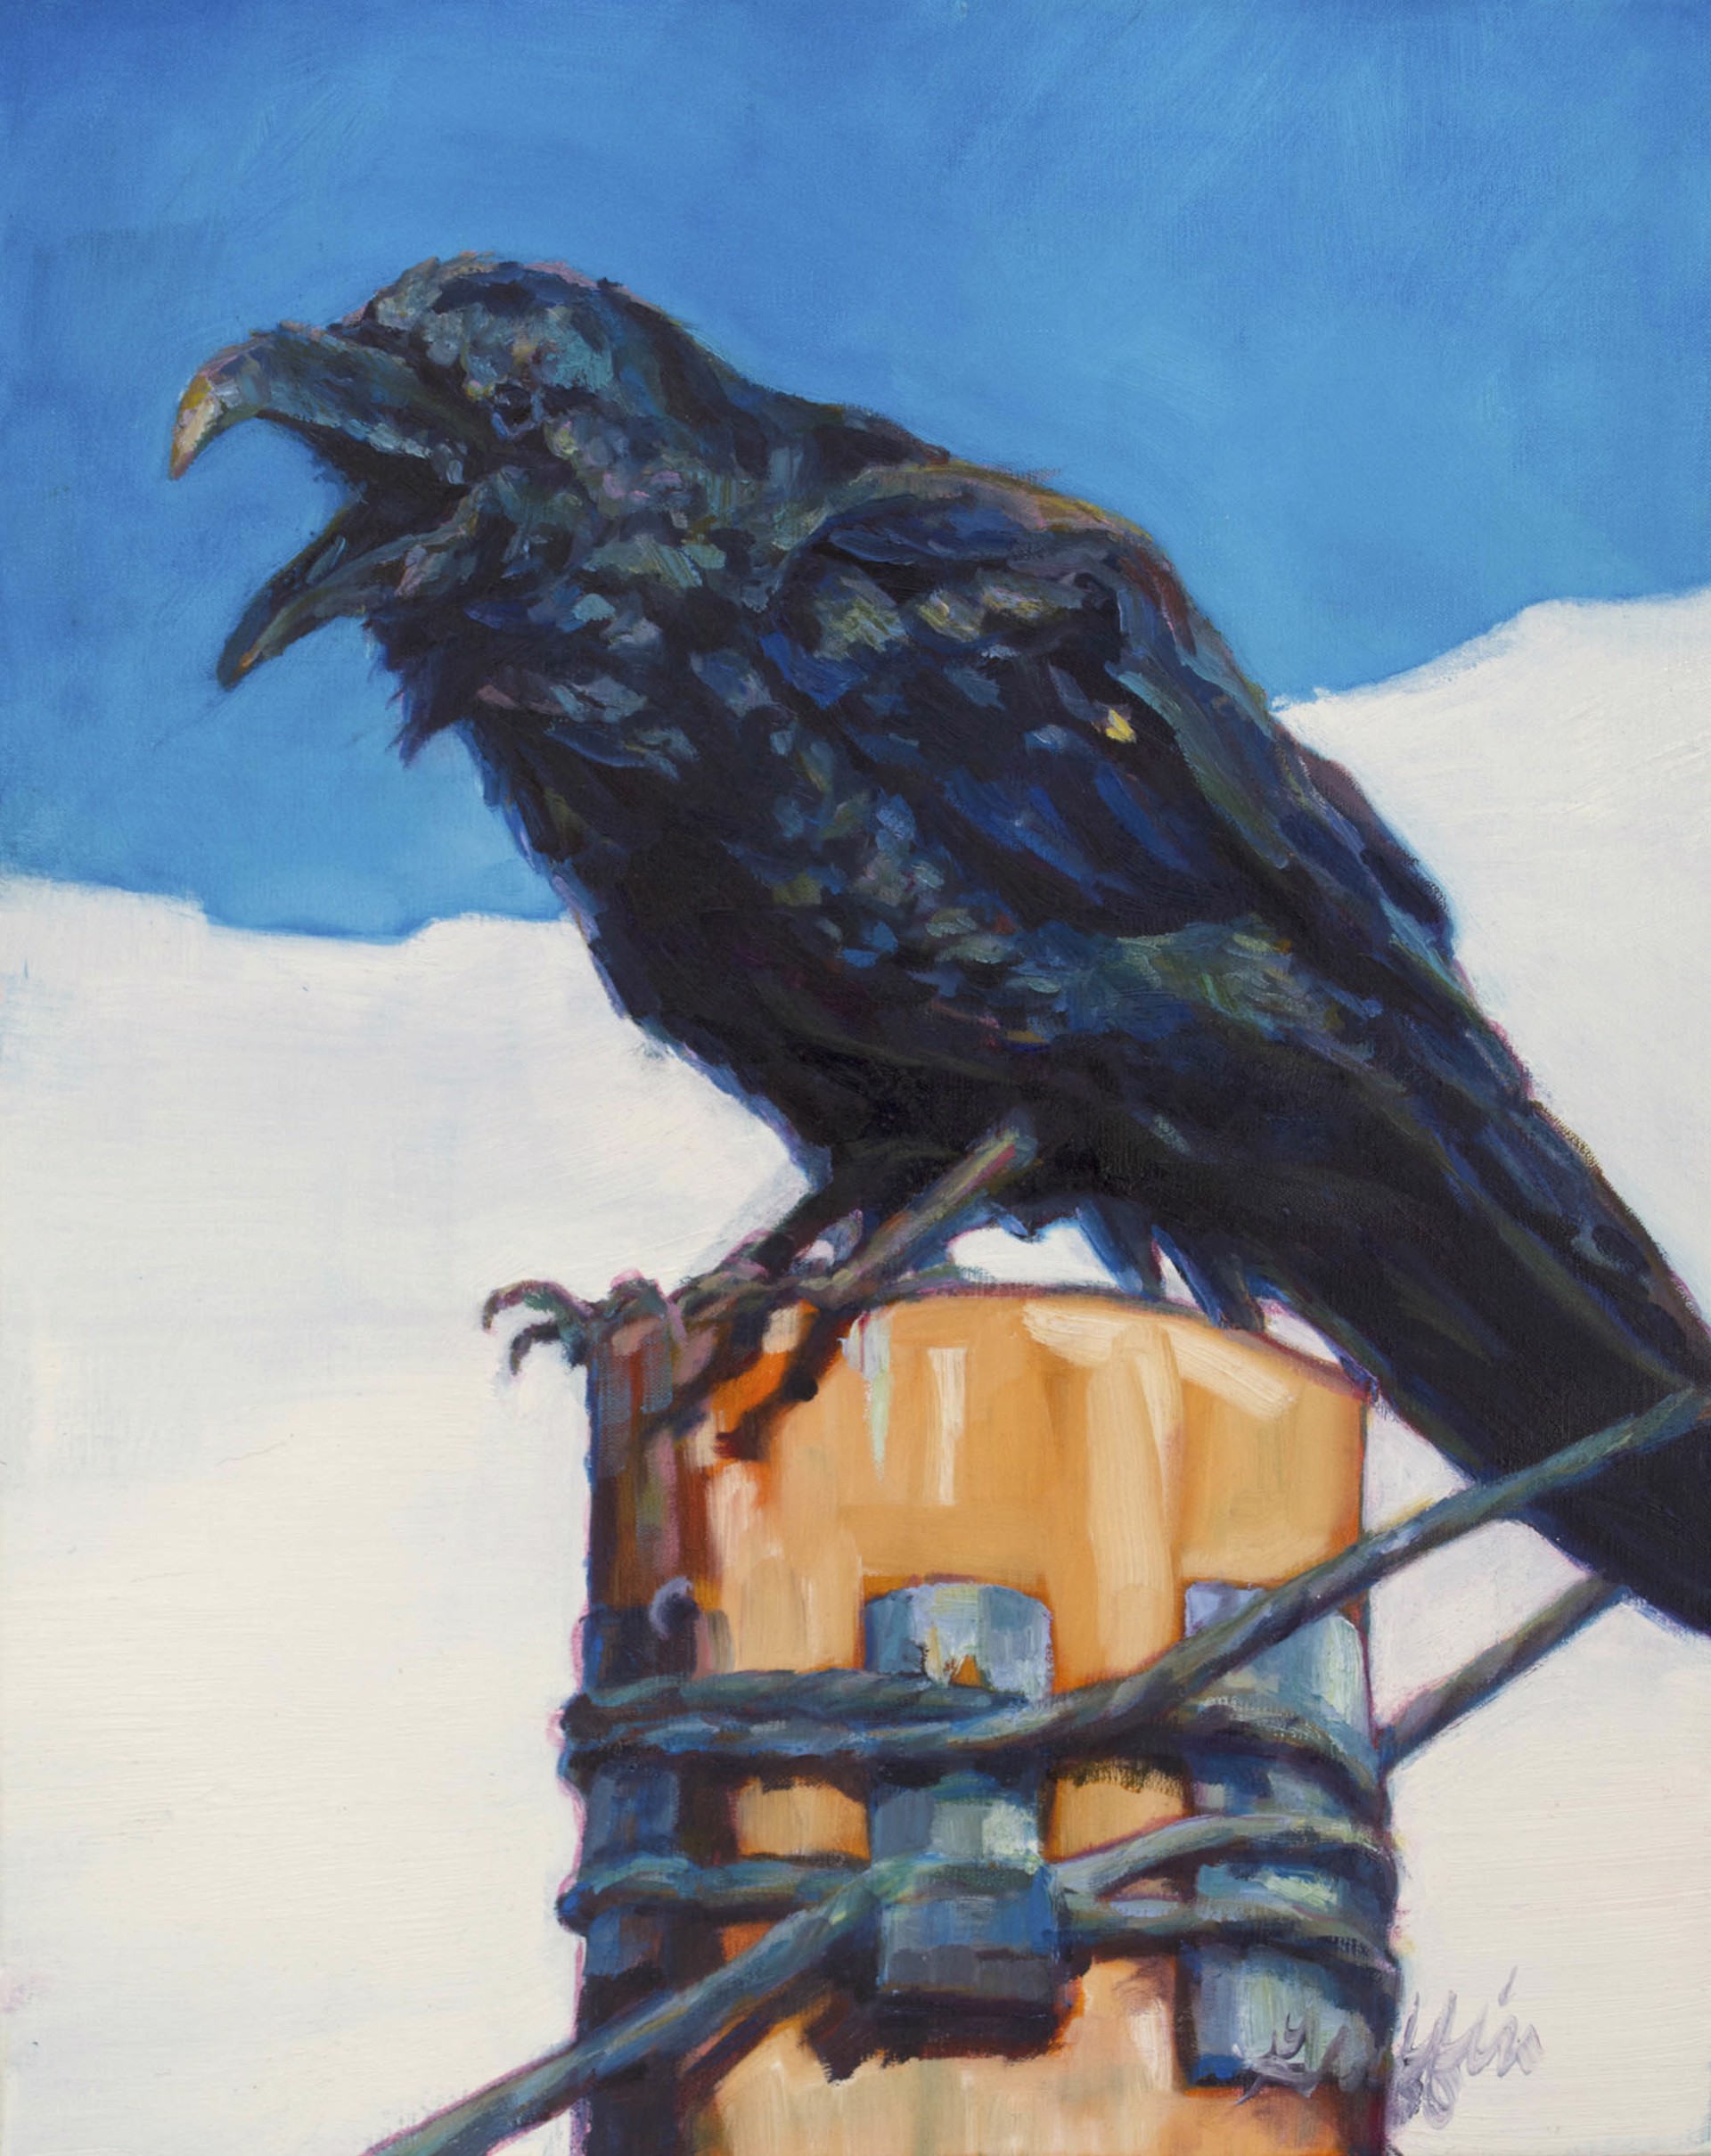 Original Oil Painting Featuring A Raven Seated On A Pole In Front Of Blue Sky With White Cloud